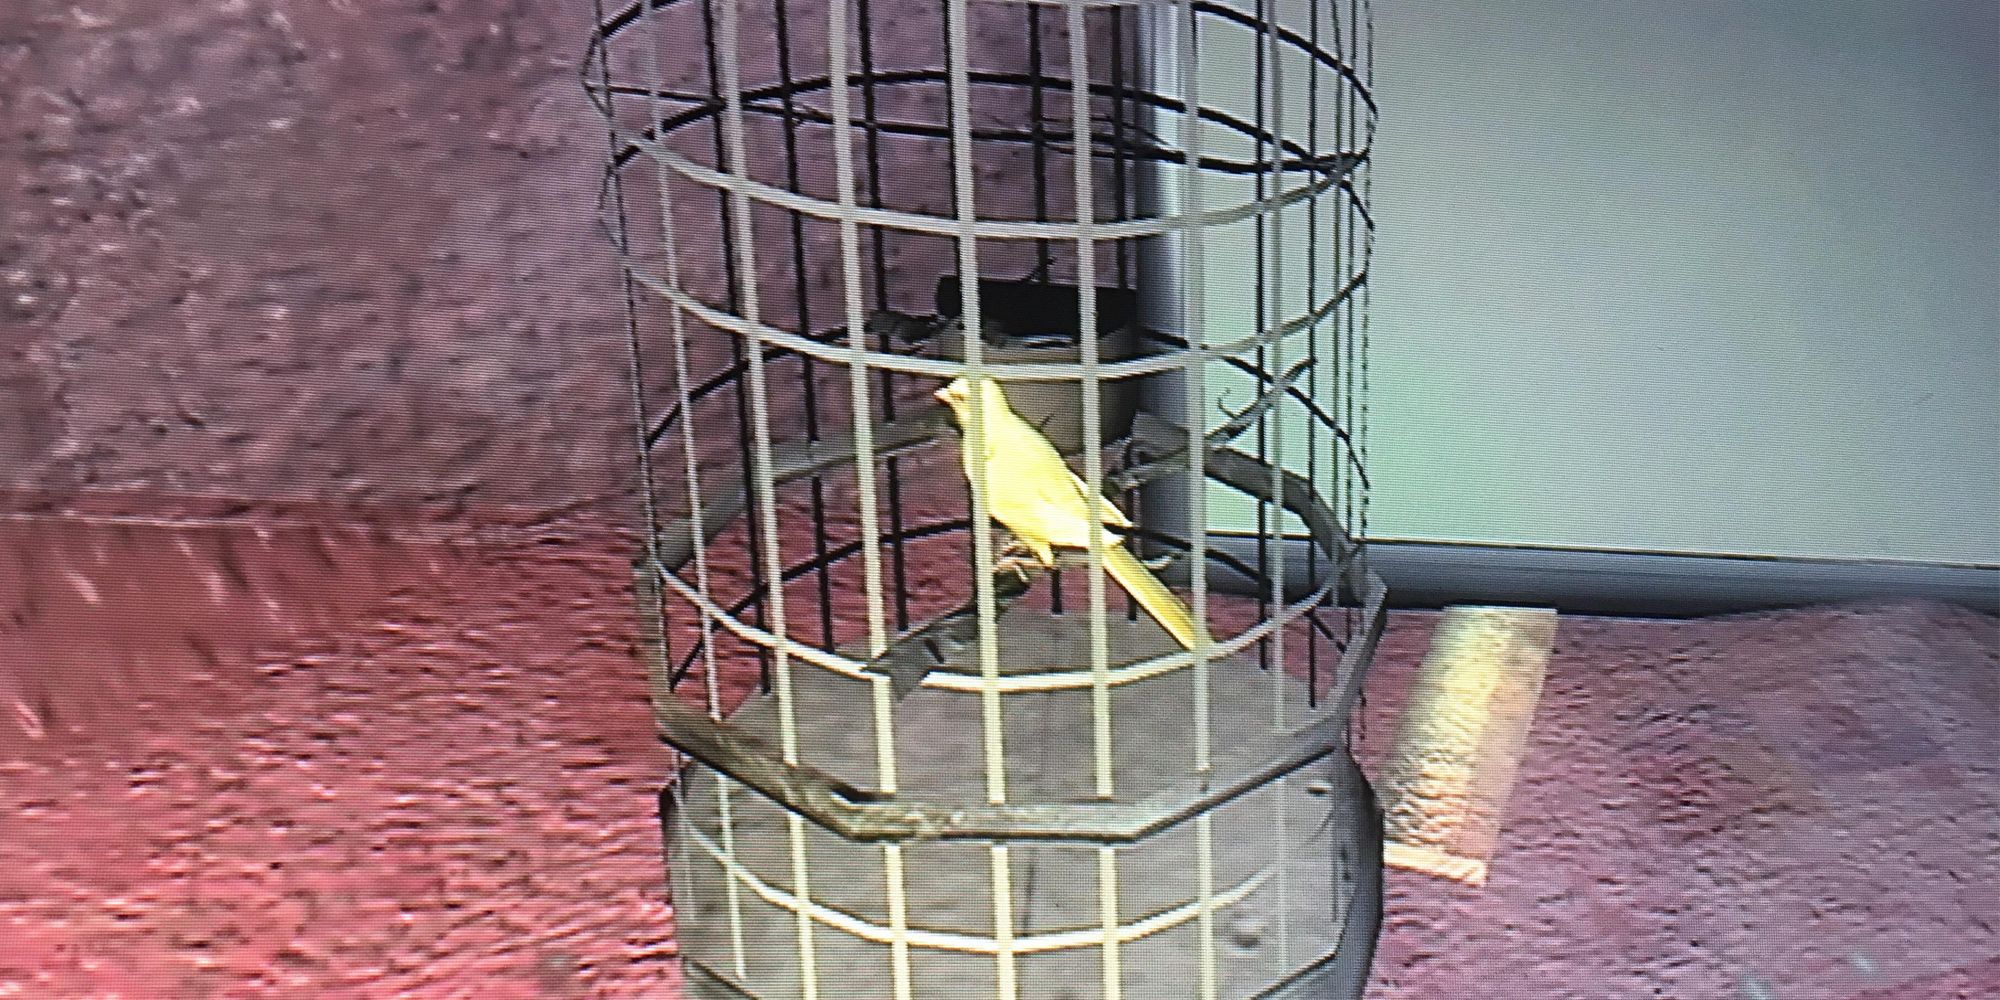 Agent 47's pet canary in Hitman: Blood Money